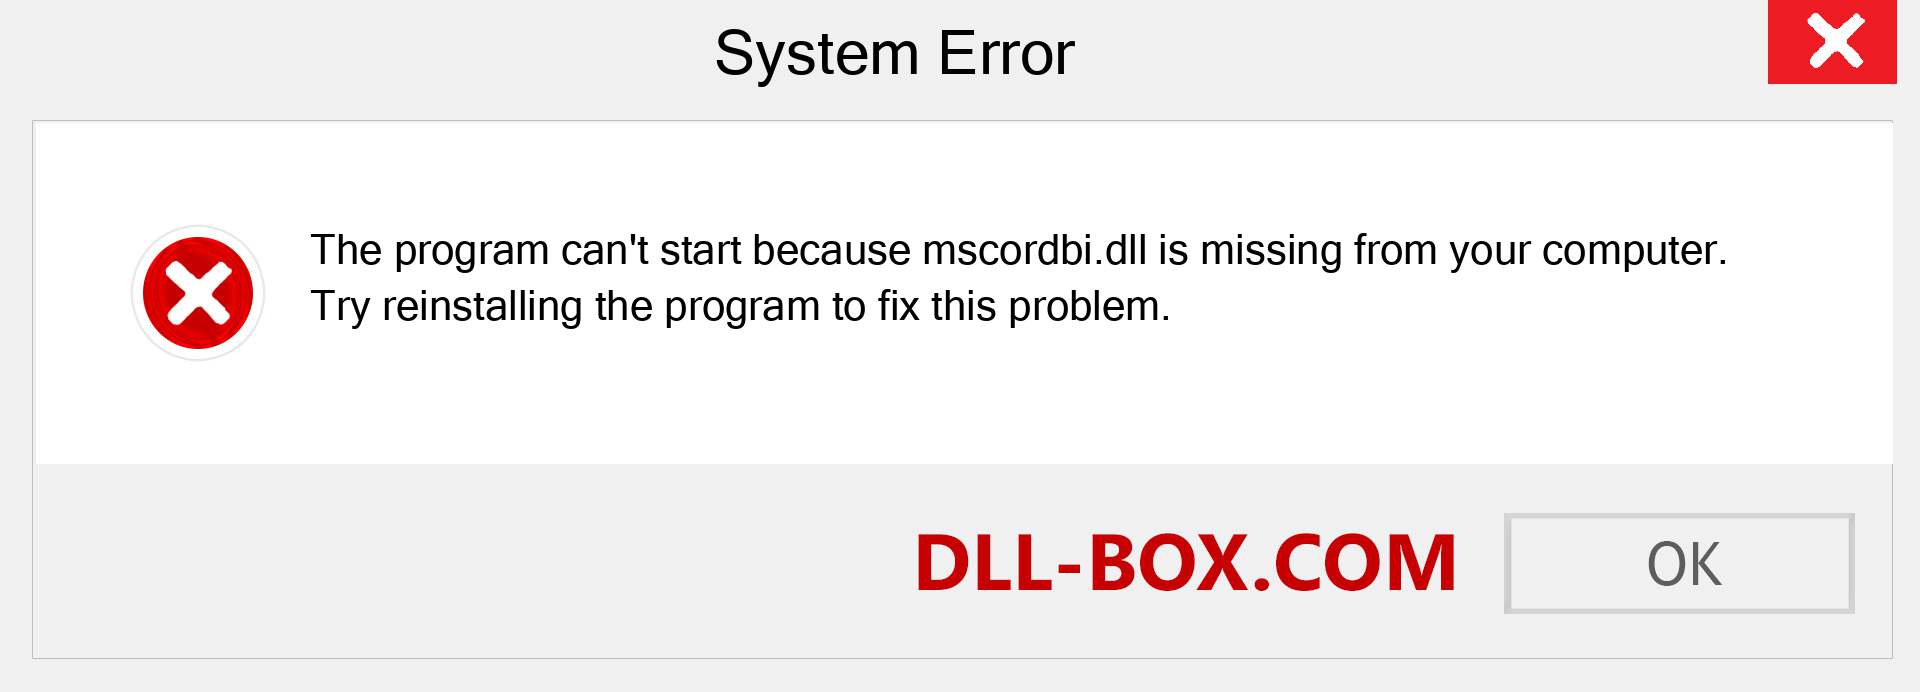  mscordbi.dll file is missing?. Download for Windows 7, 8, 10 - Fix  mscordbi dll Missing Error on Windows, photos, images